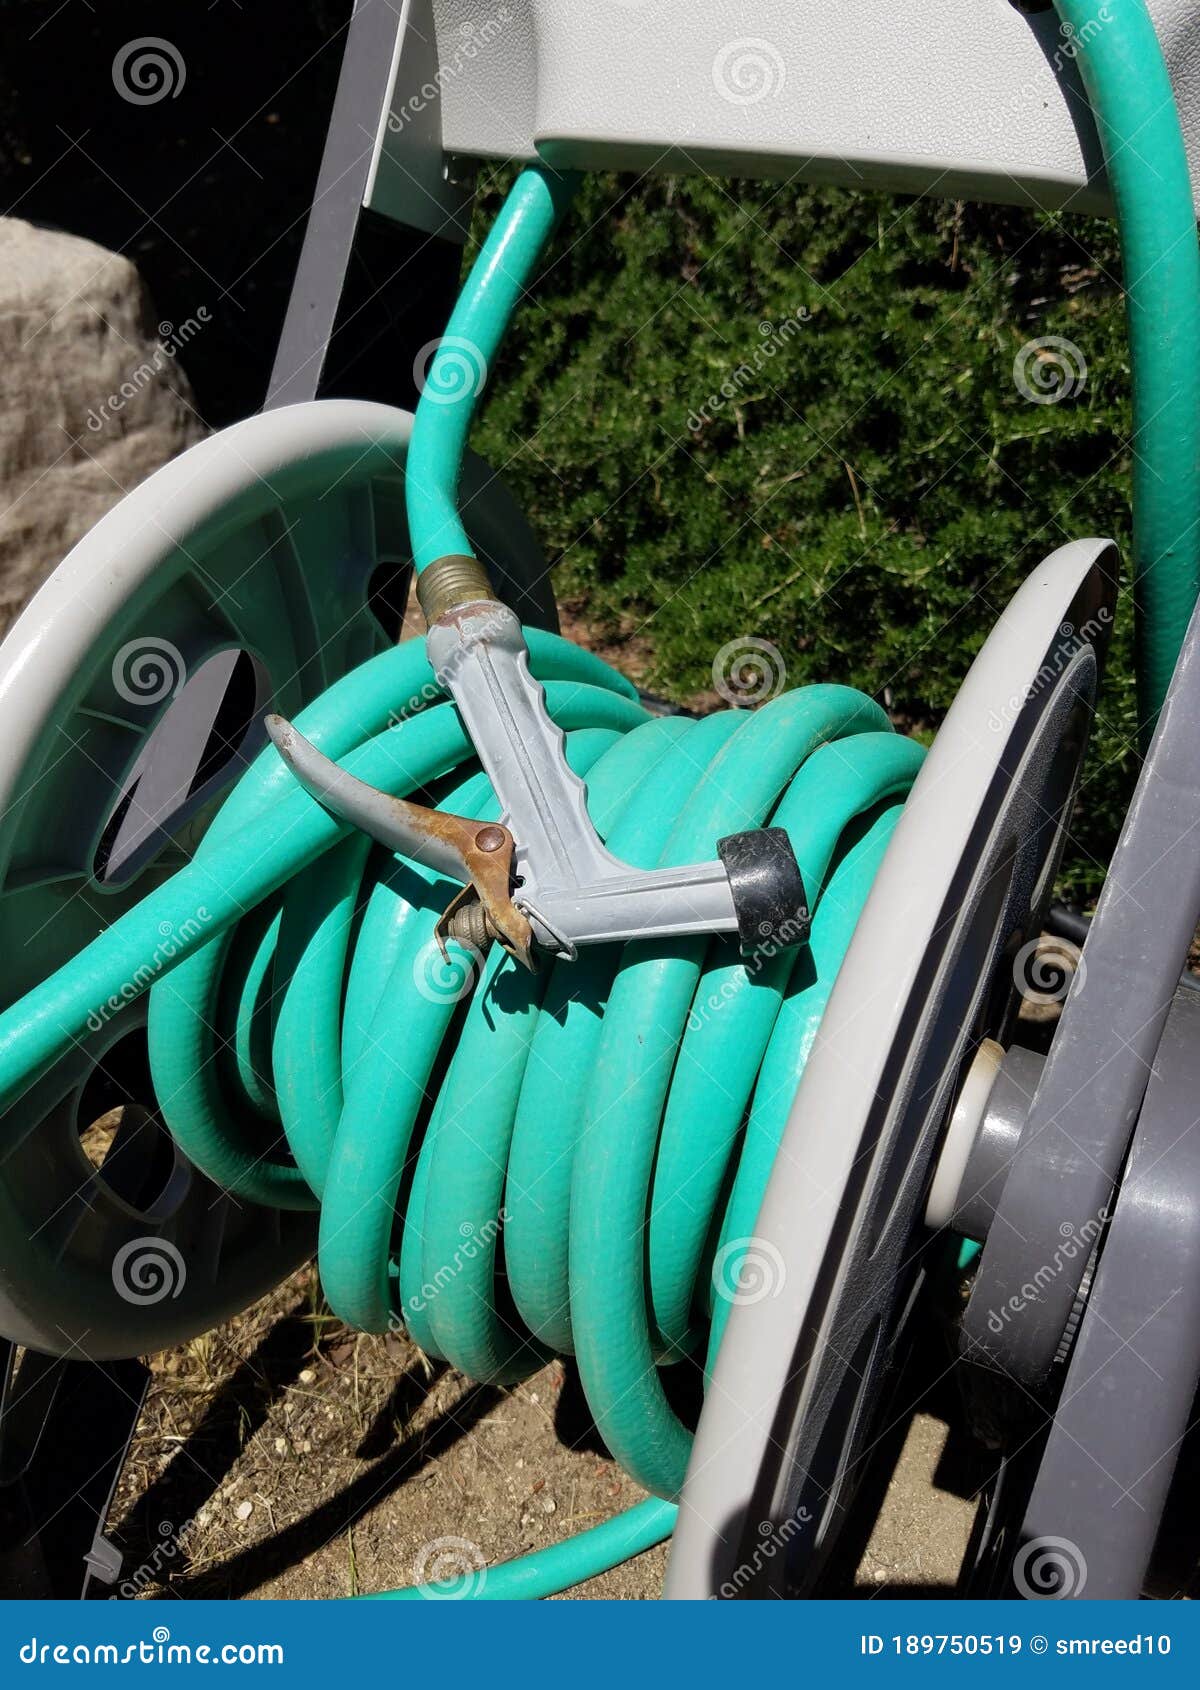 Closeup of Green Rubber Hose on Hose Reel with Spray Nozzle Stock